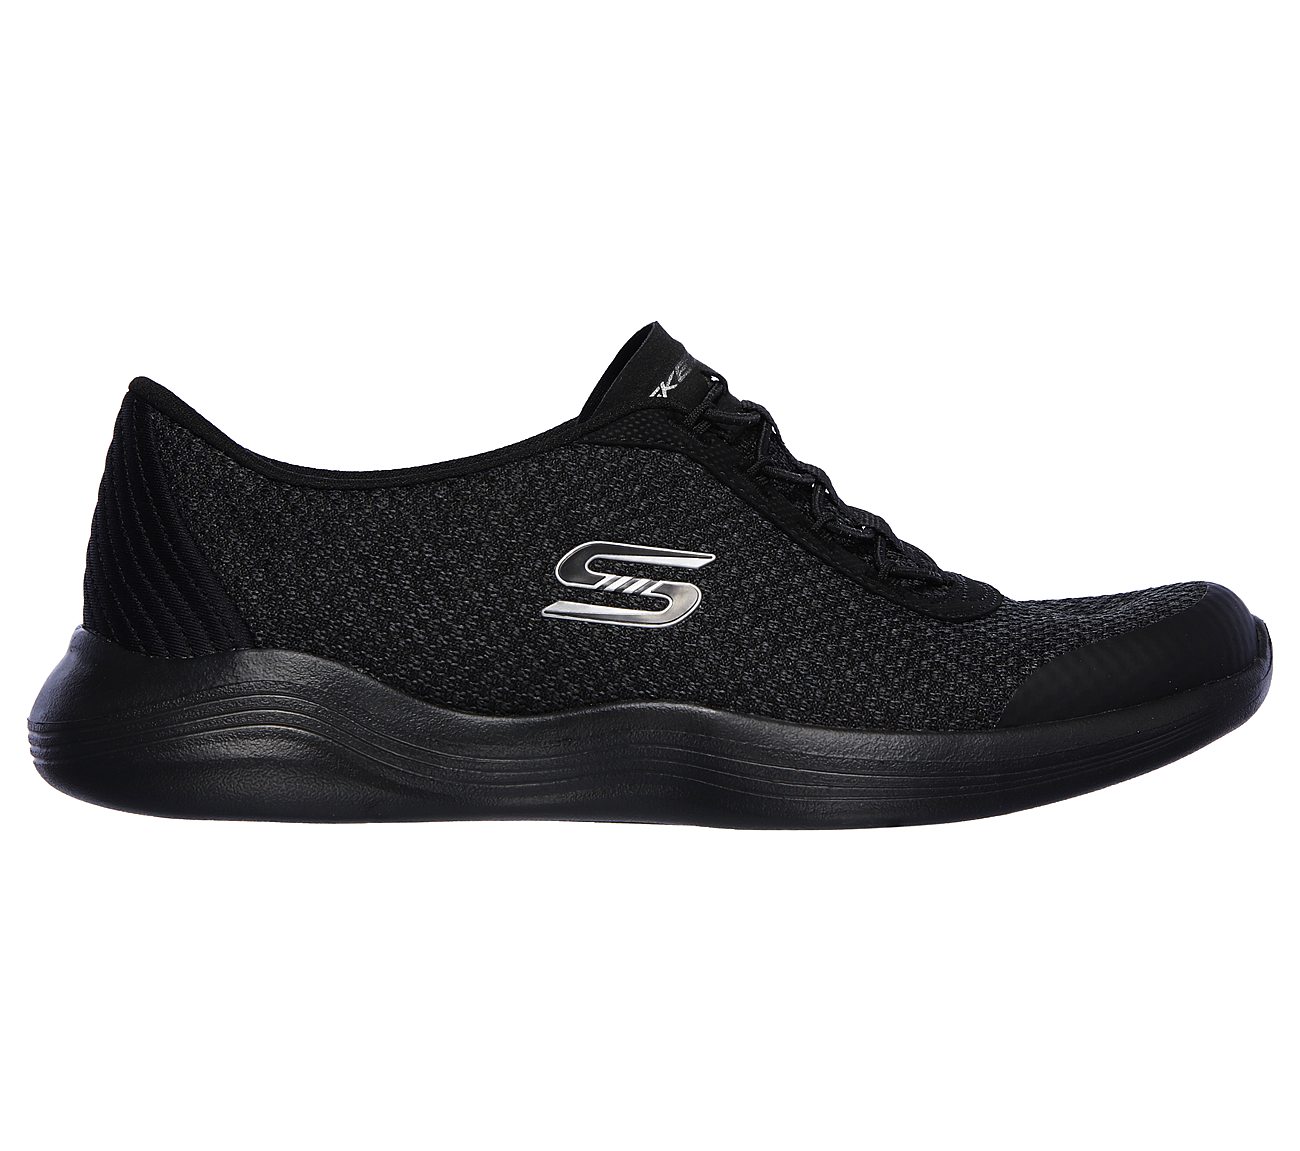 SKECHERS Envy - Good Thinking Bungee 